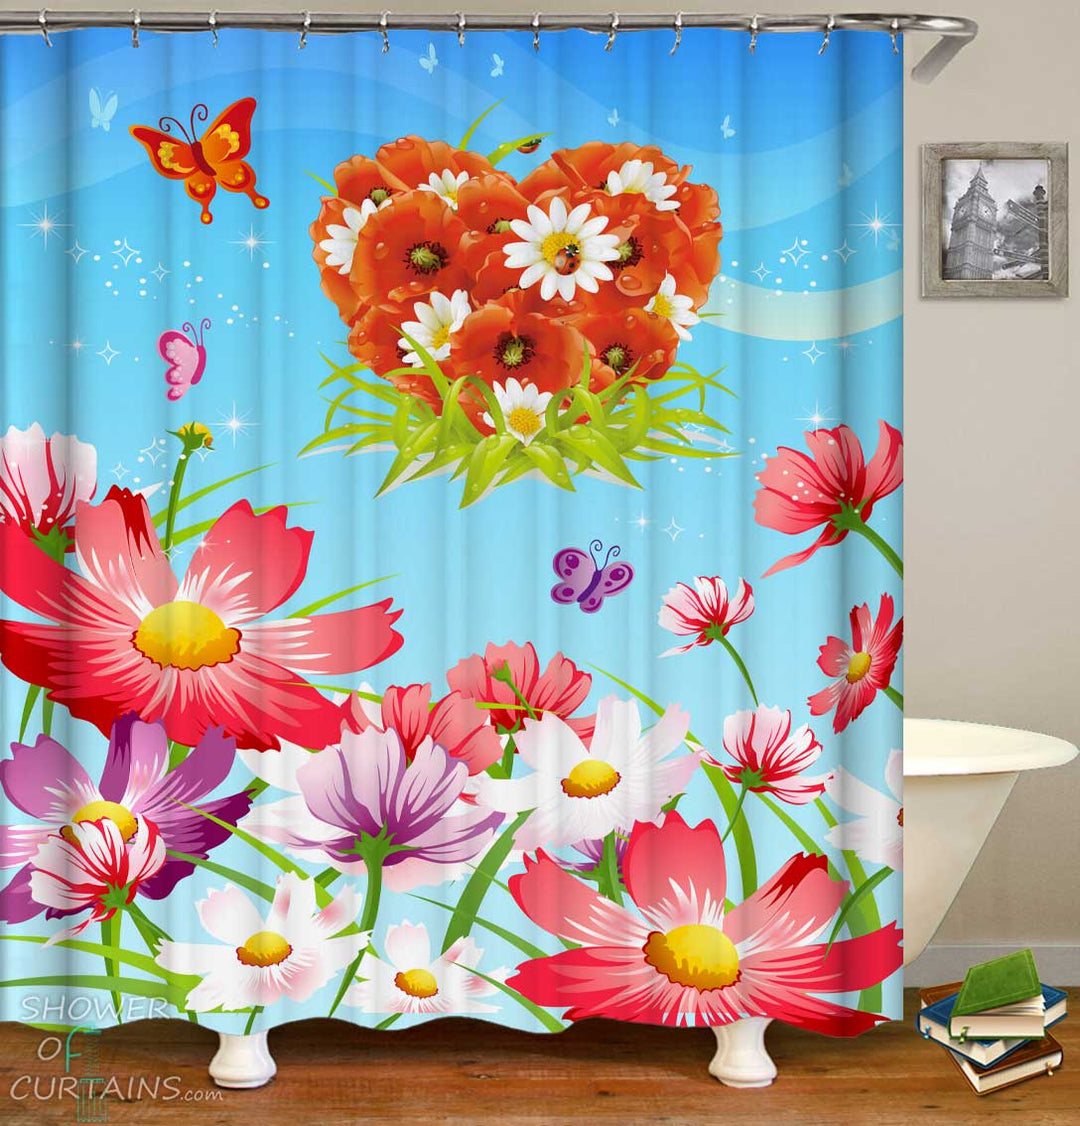 Shower Curtains with Cheerful Flowery Day